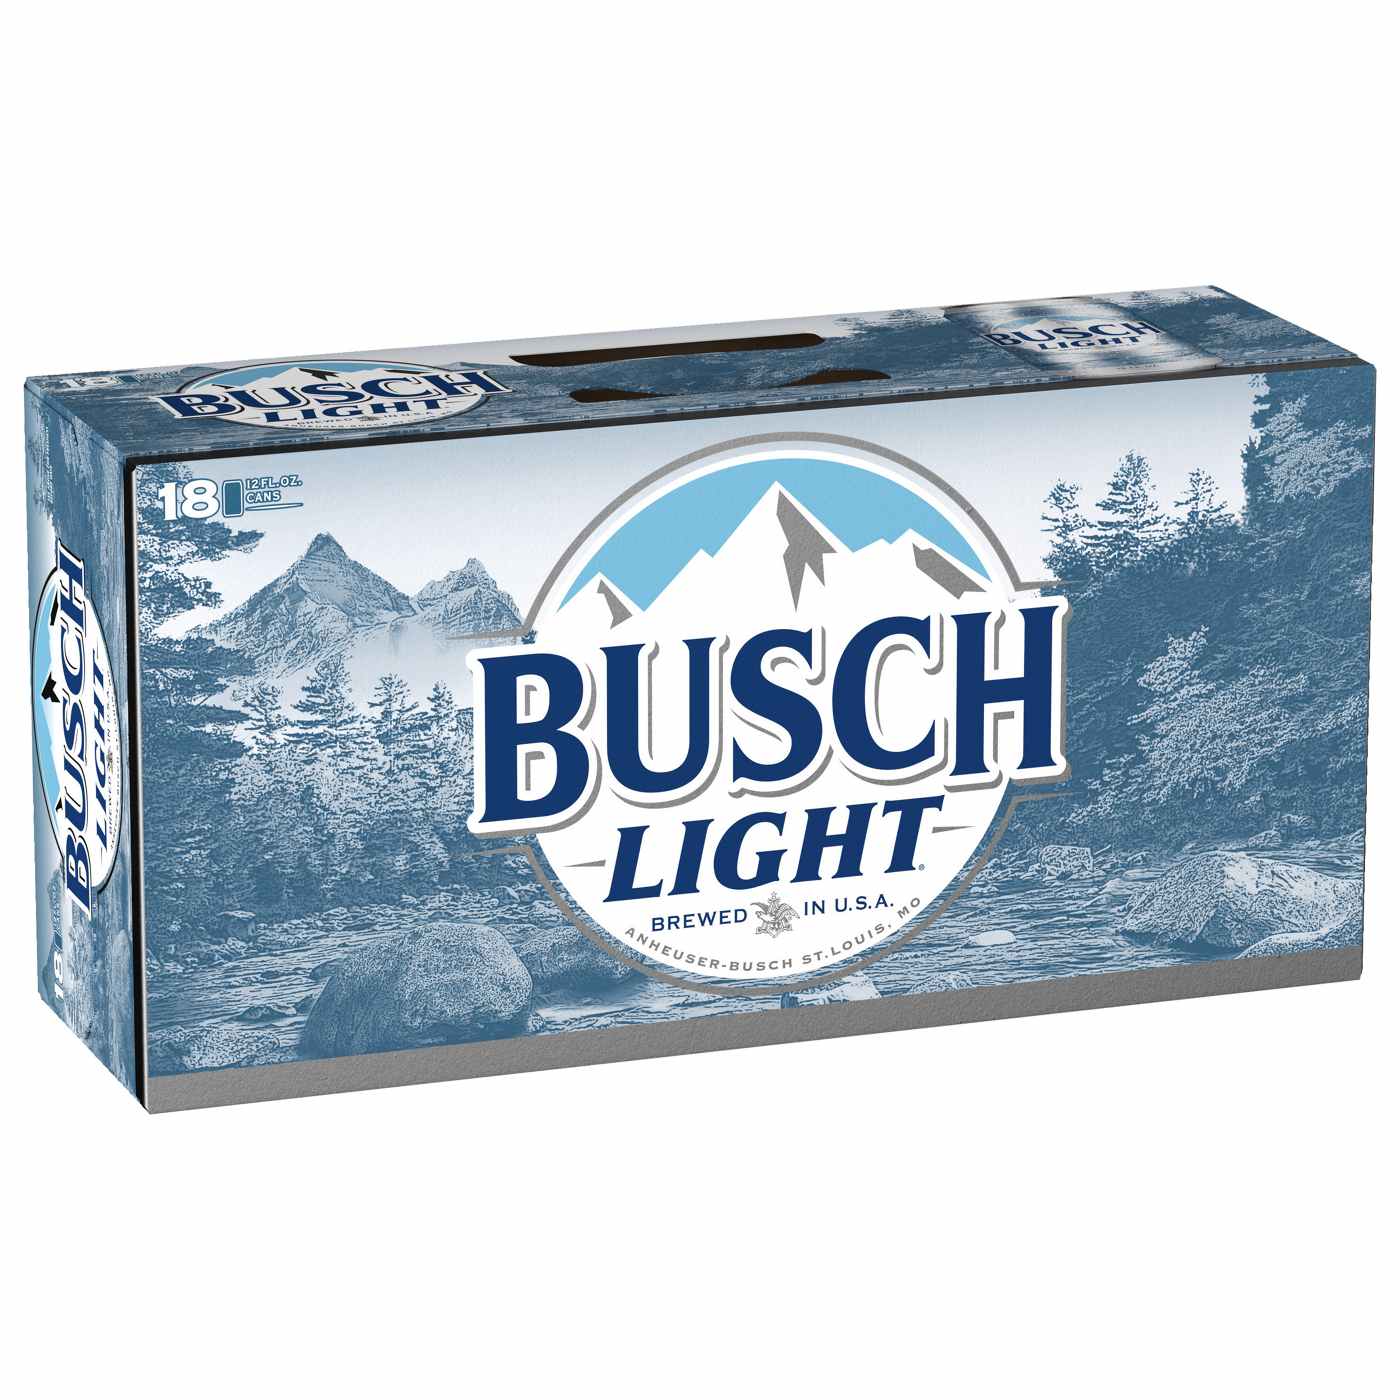 Busch Light Beer 18 pk Cans; image 1 of 2